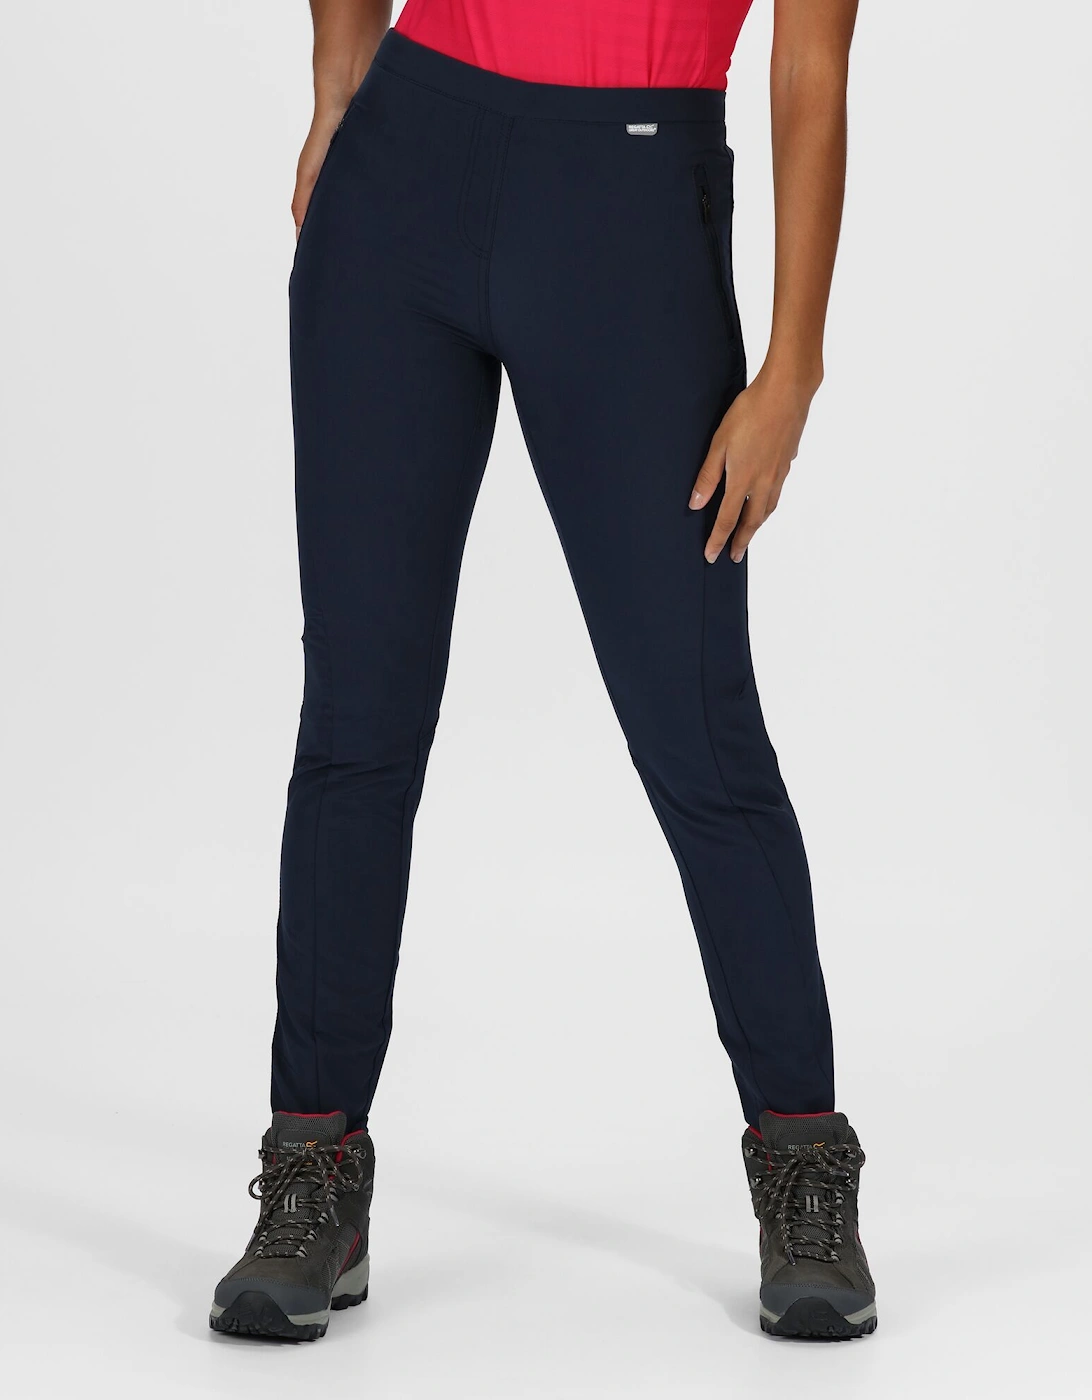 Womens/Ladies Pentre Stretch Trousers